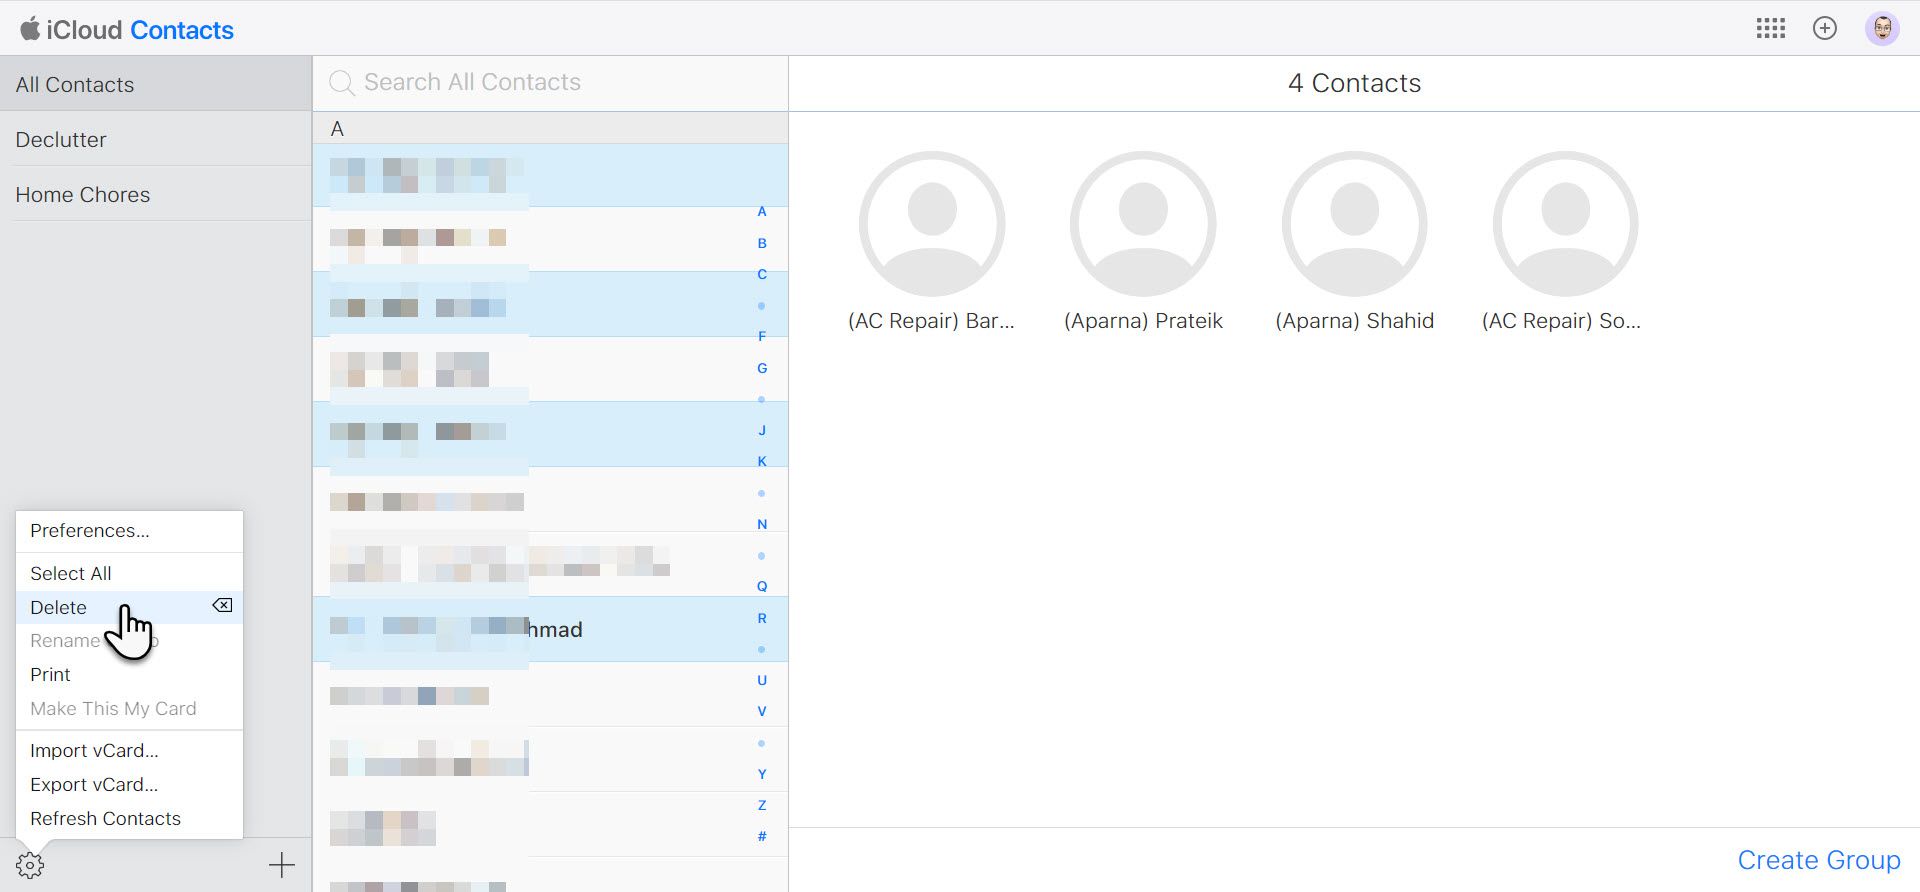 Selecting iCloud Contacts for deletion